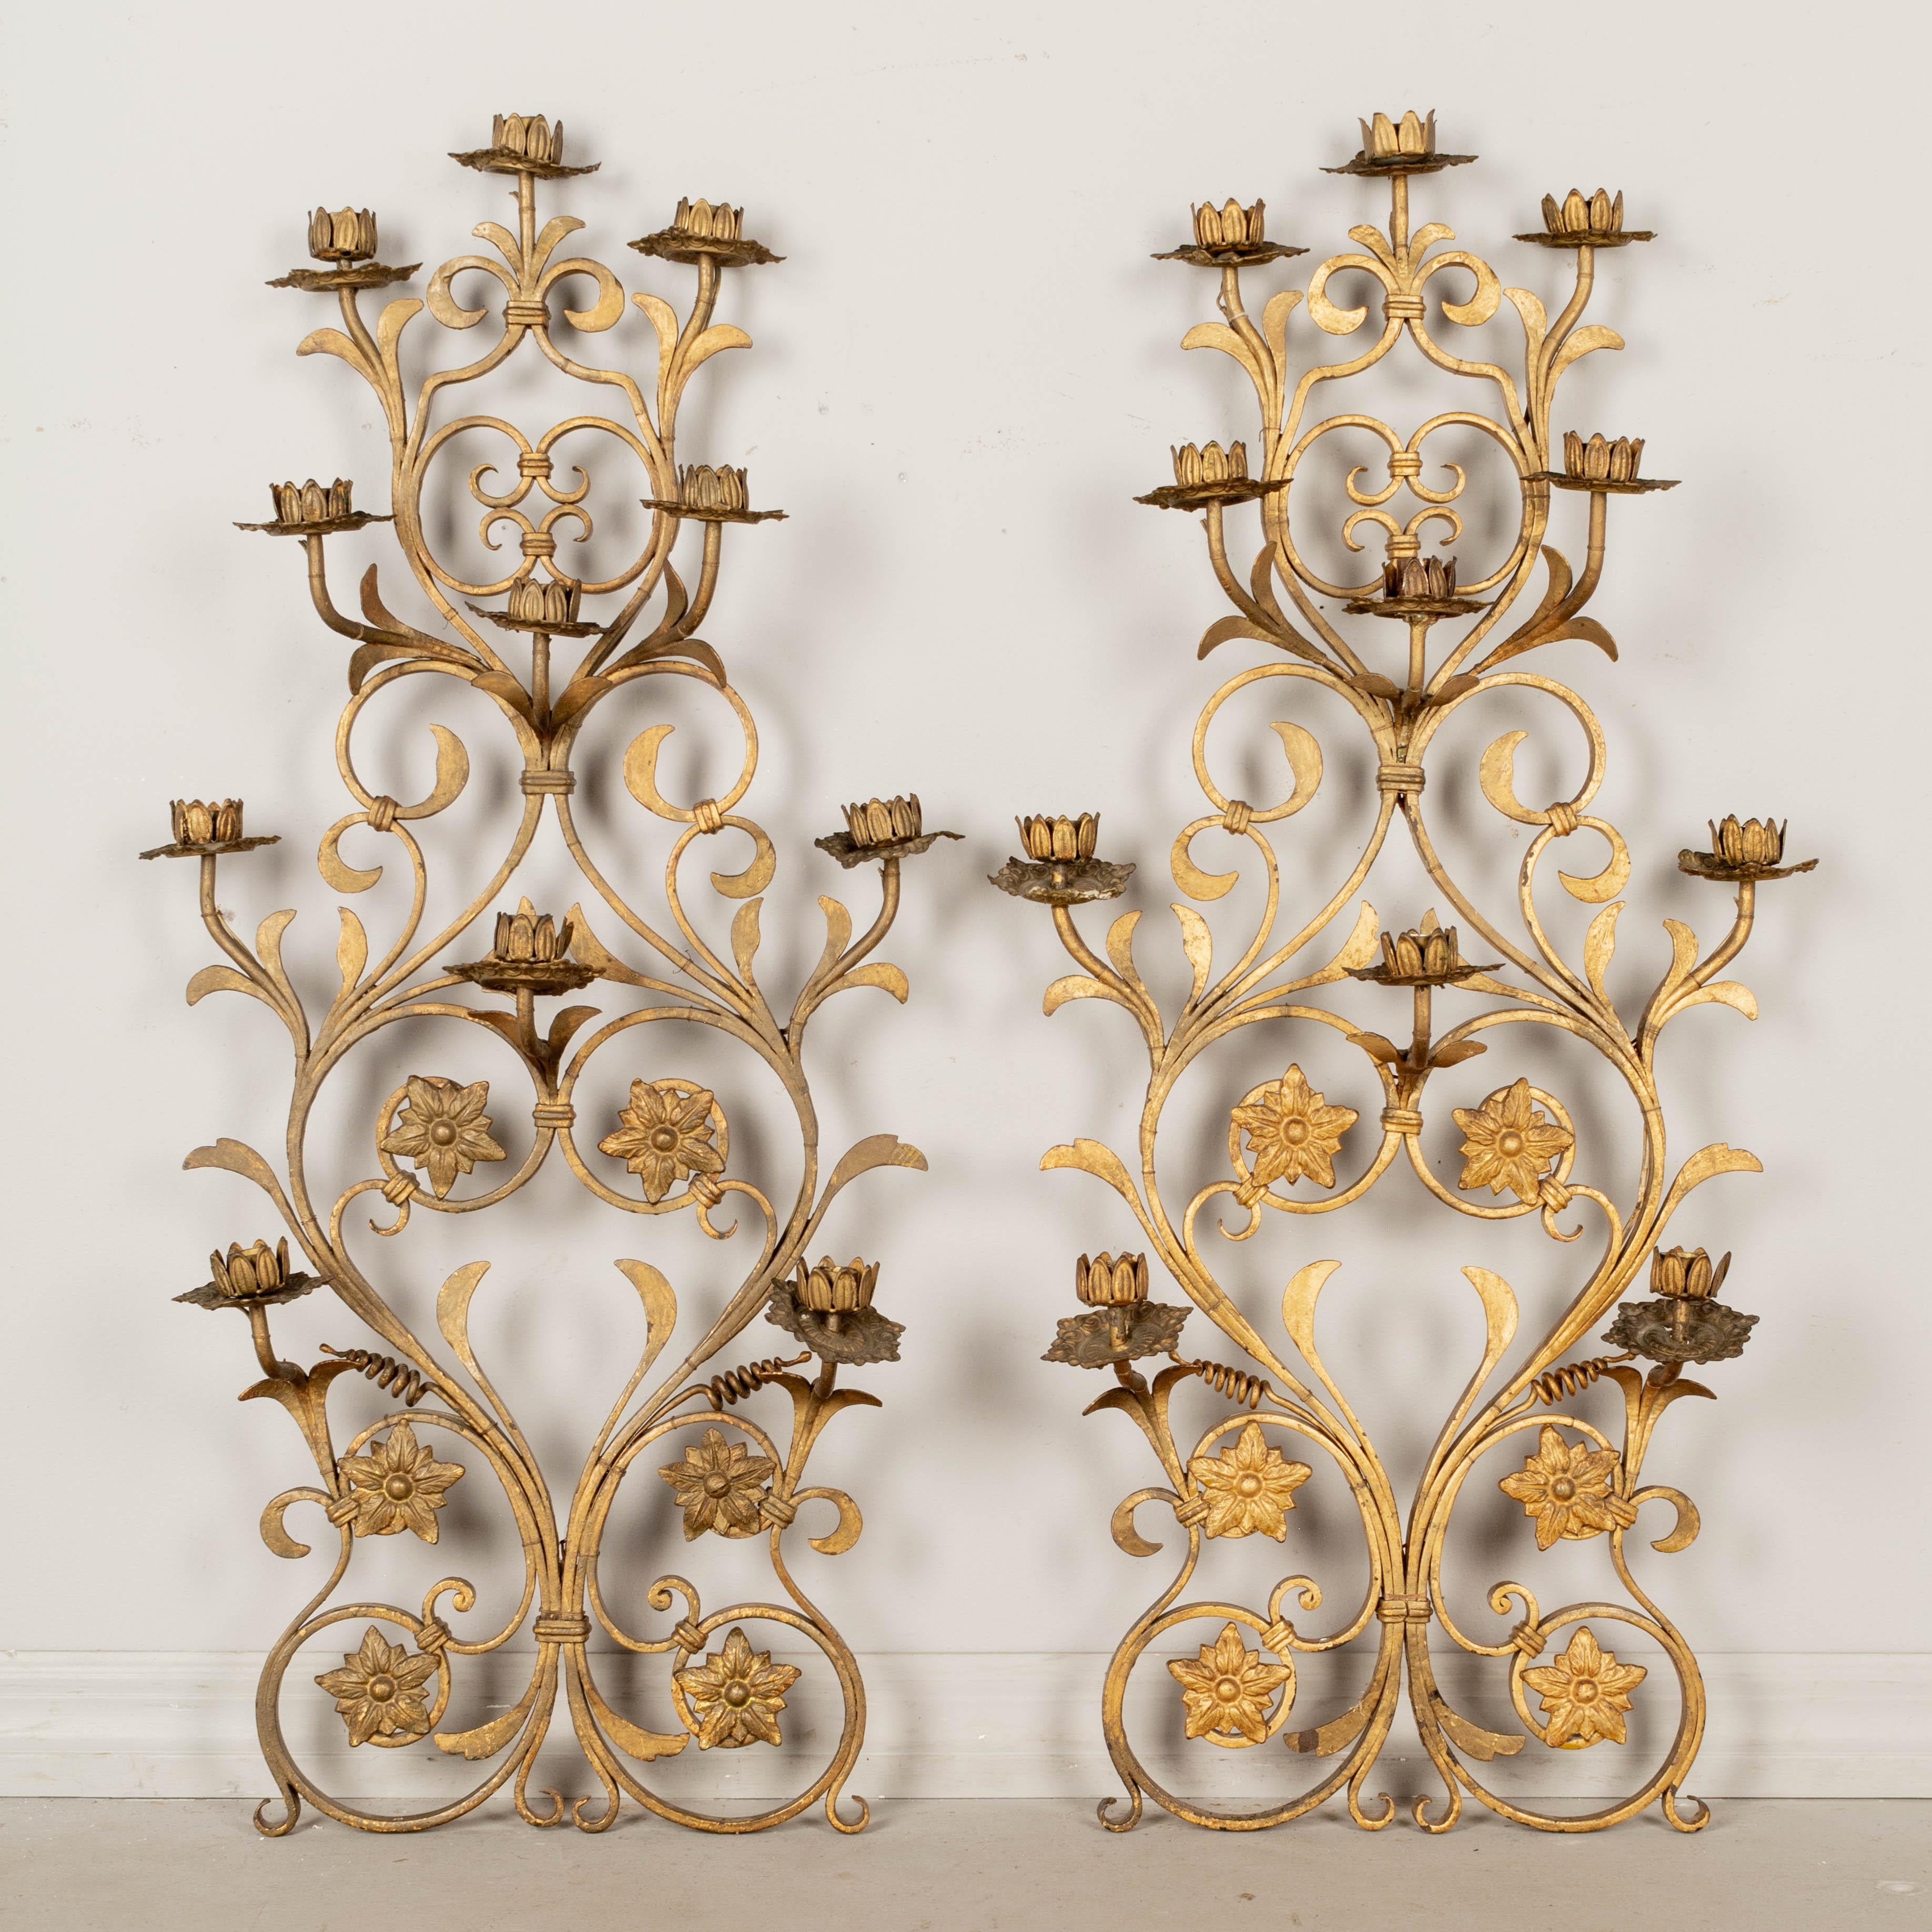 A pair of French gilt wrought iron and tôle eleven-light candelabra sconces decorated with cast iron rosettes. Nice iron work with stamped brass tôle candle cups and bobeches (some slightly bent). These were large floor candelabra and are missing